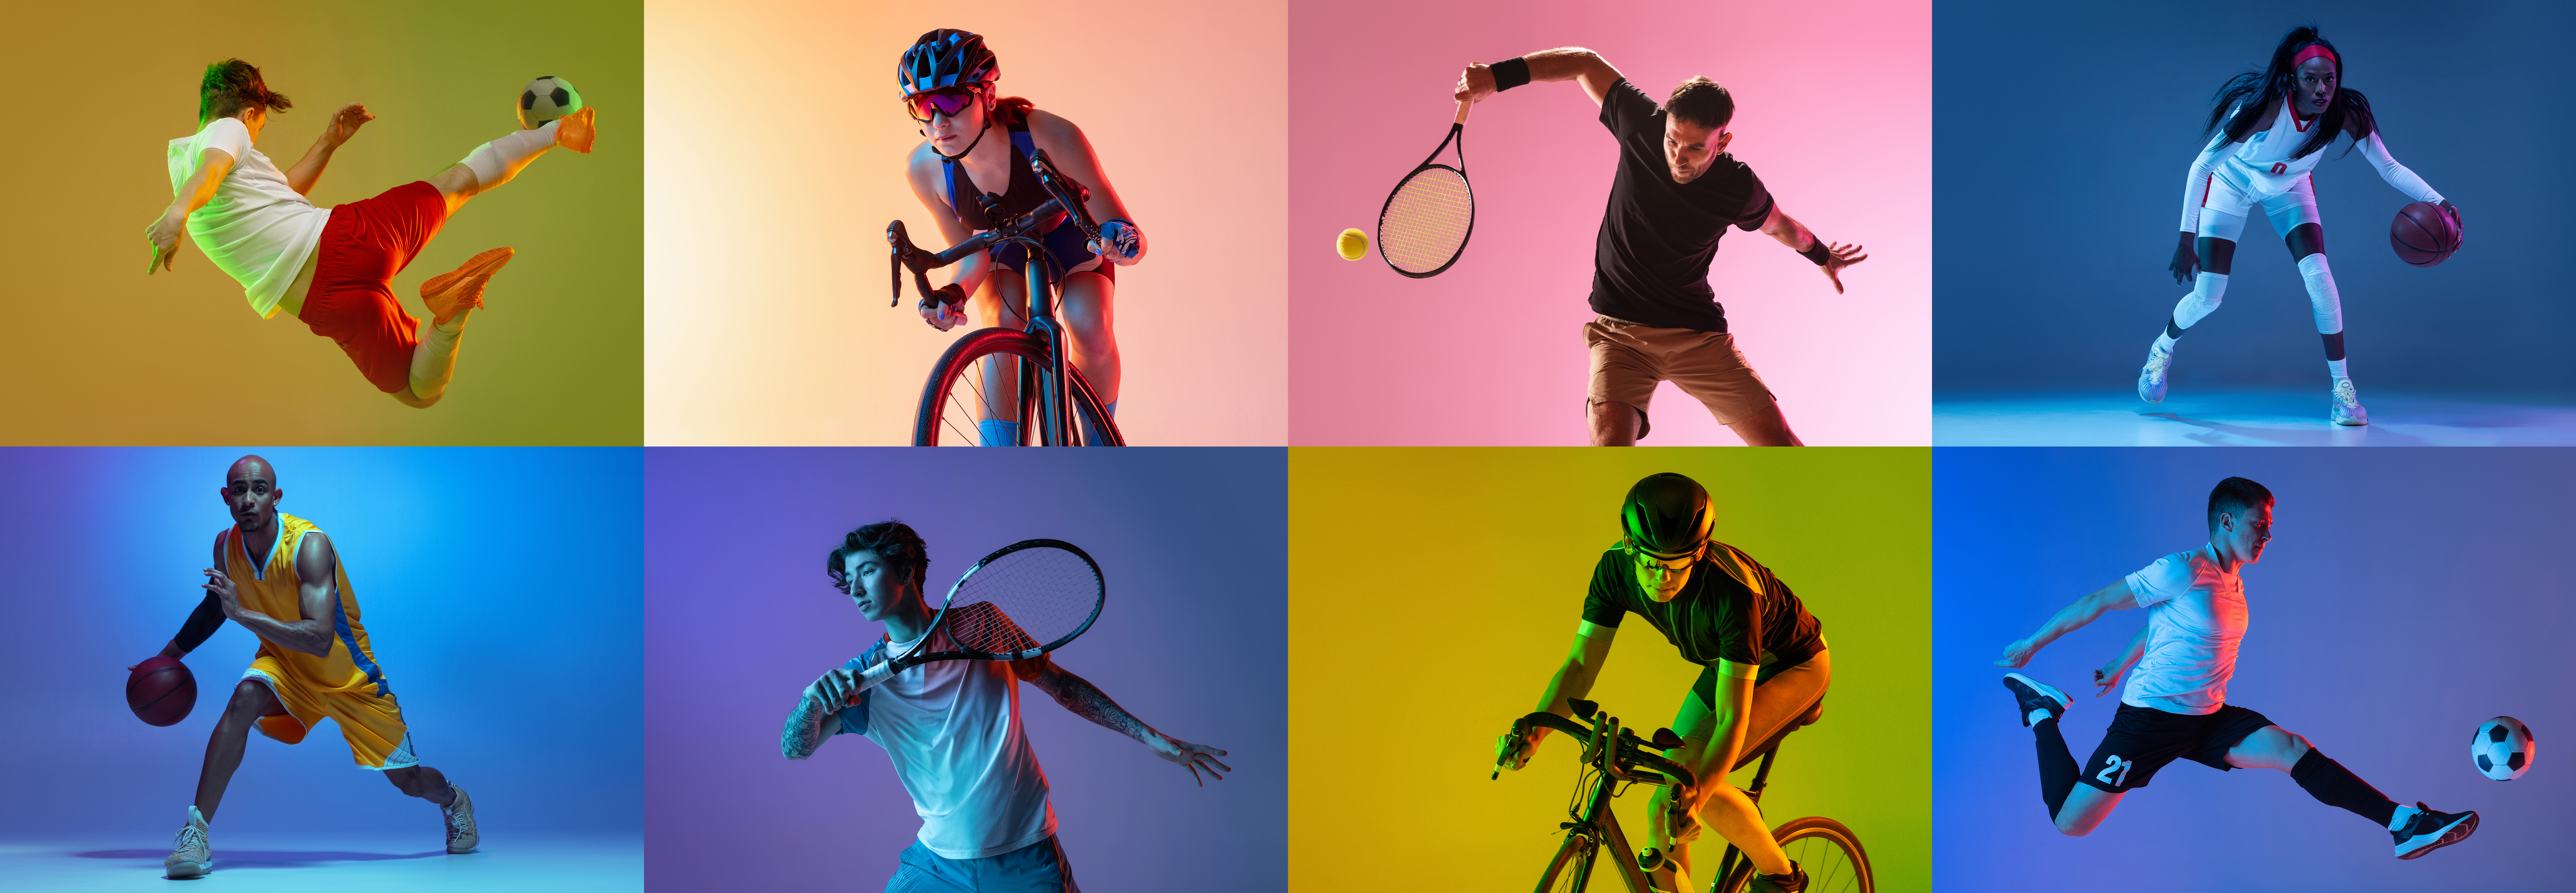 Basketball,,Soccer,,Tennis,And,Cycling.,Collage,Of,Different,Professional,Male